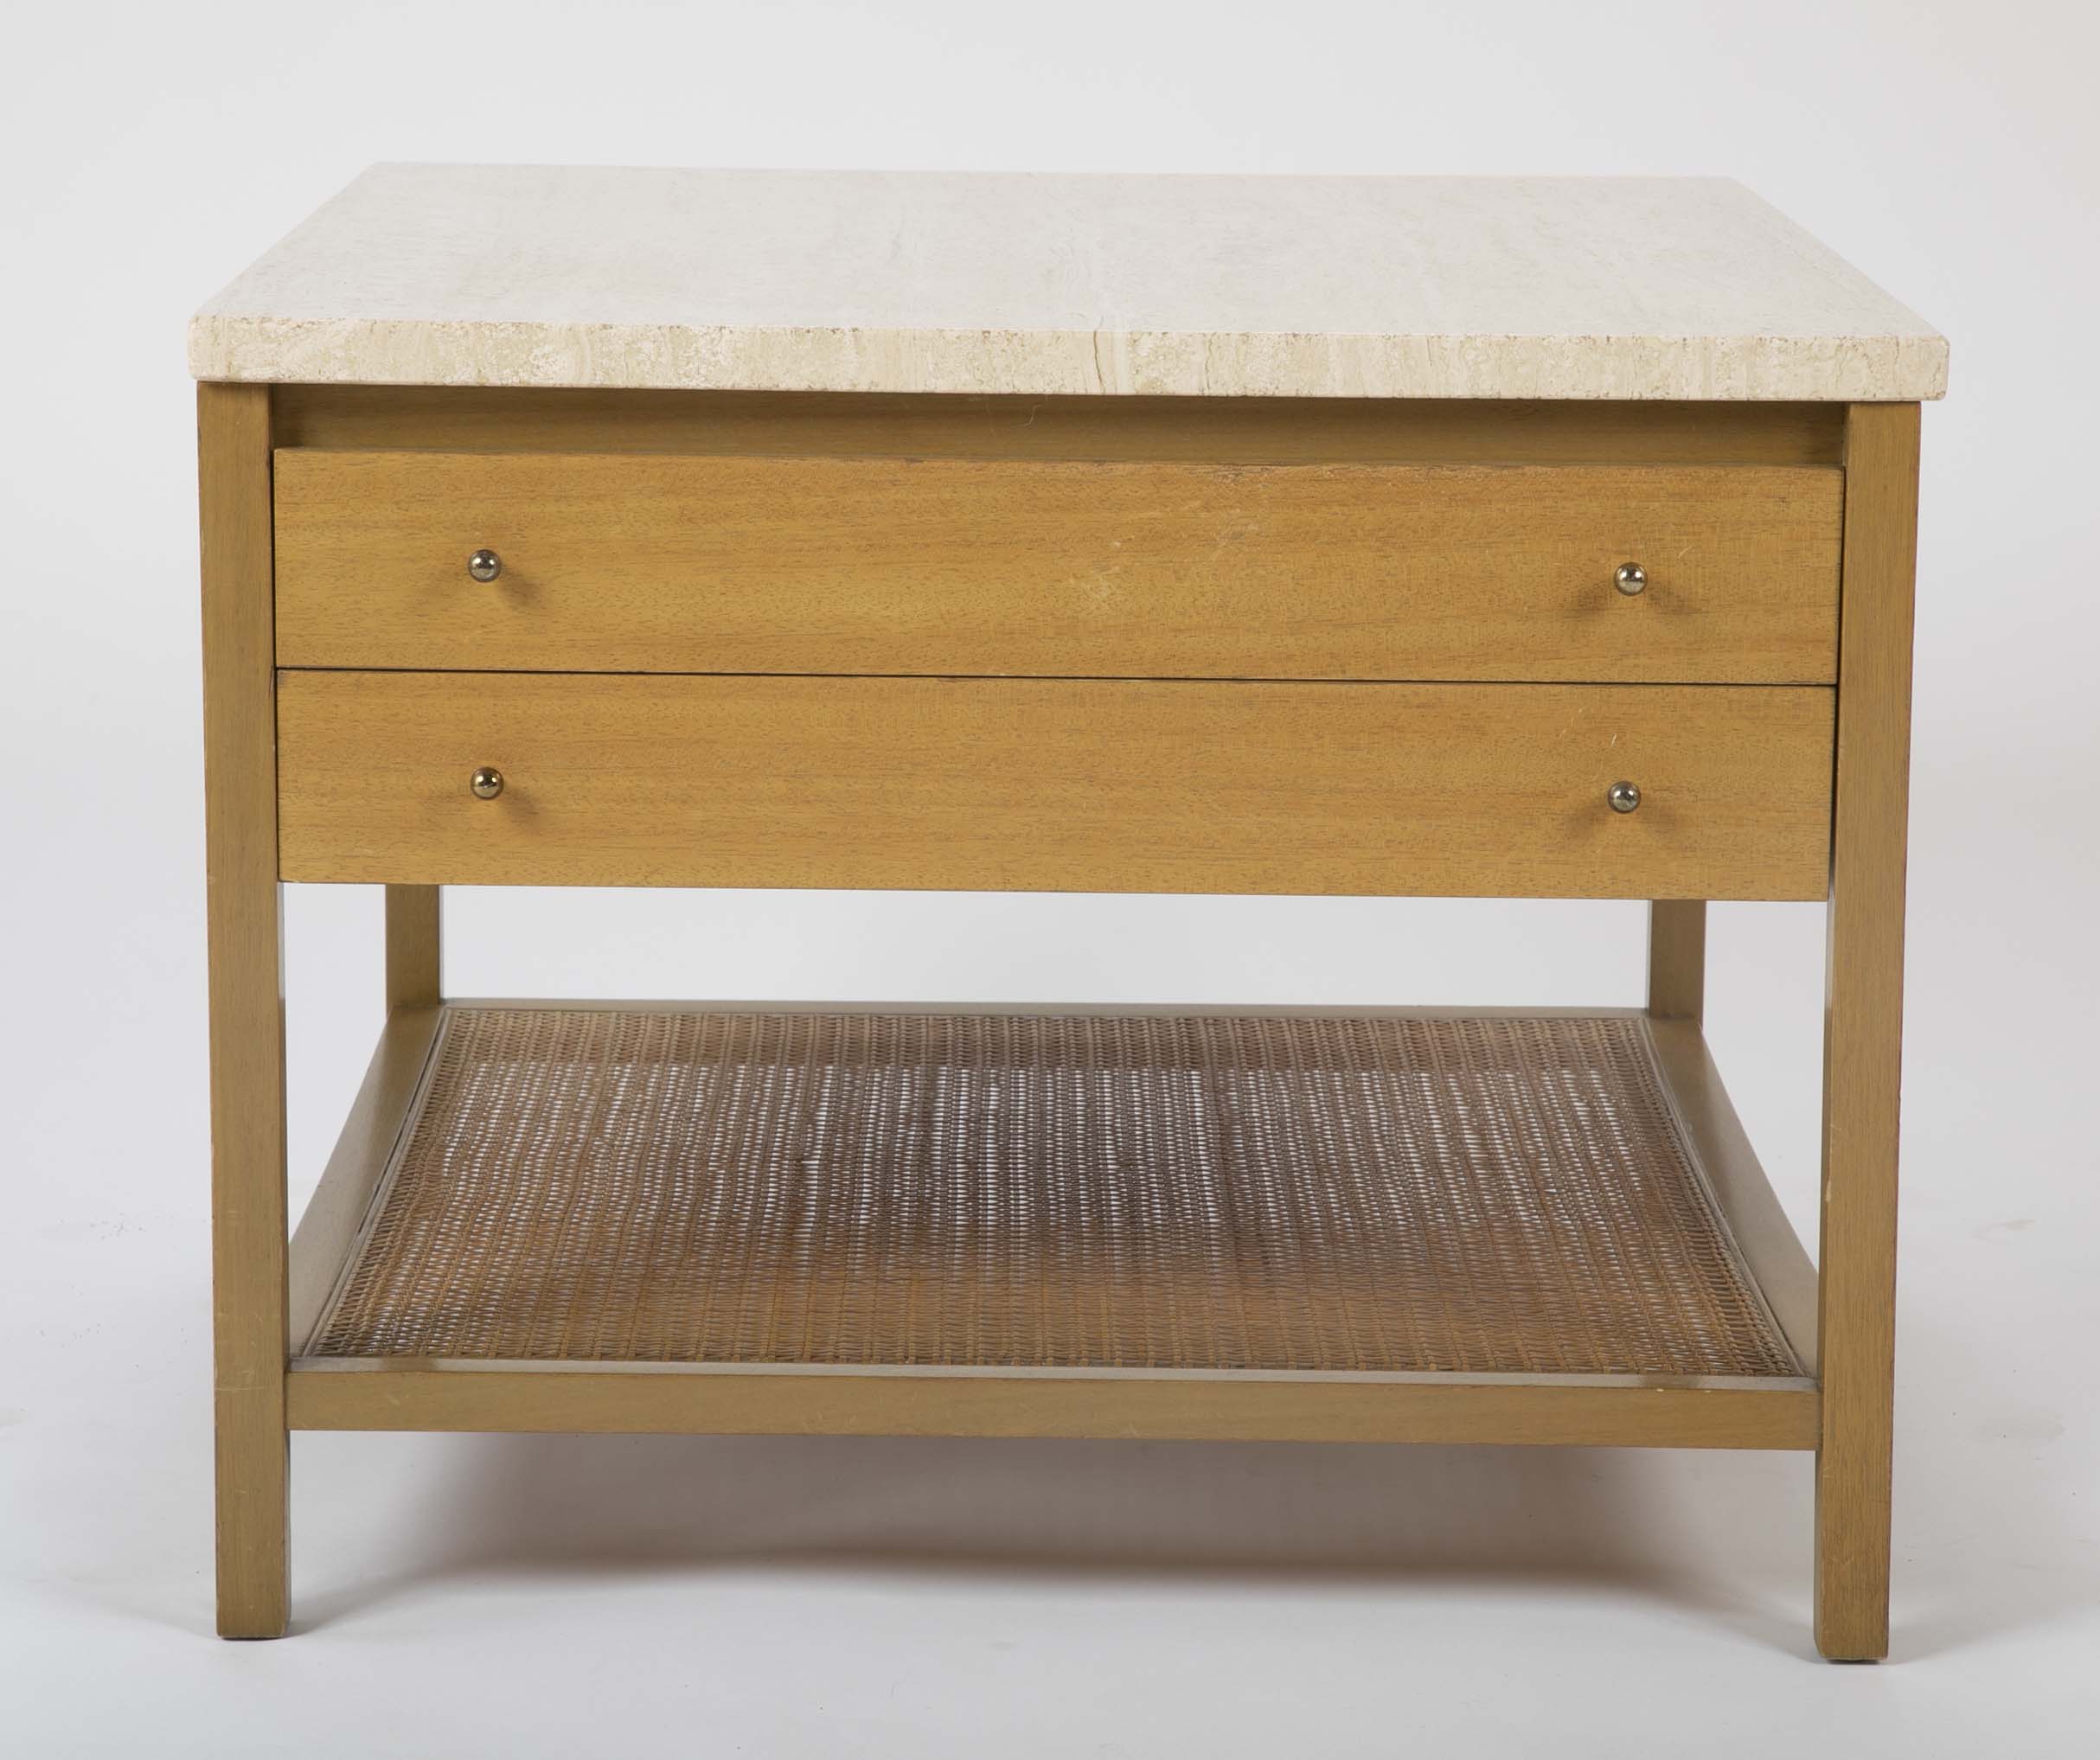 Travertine Top Mahogany Side Table Designed by Paul McCobb